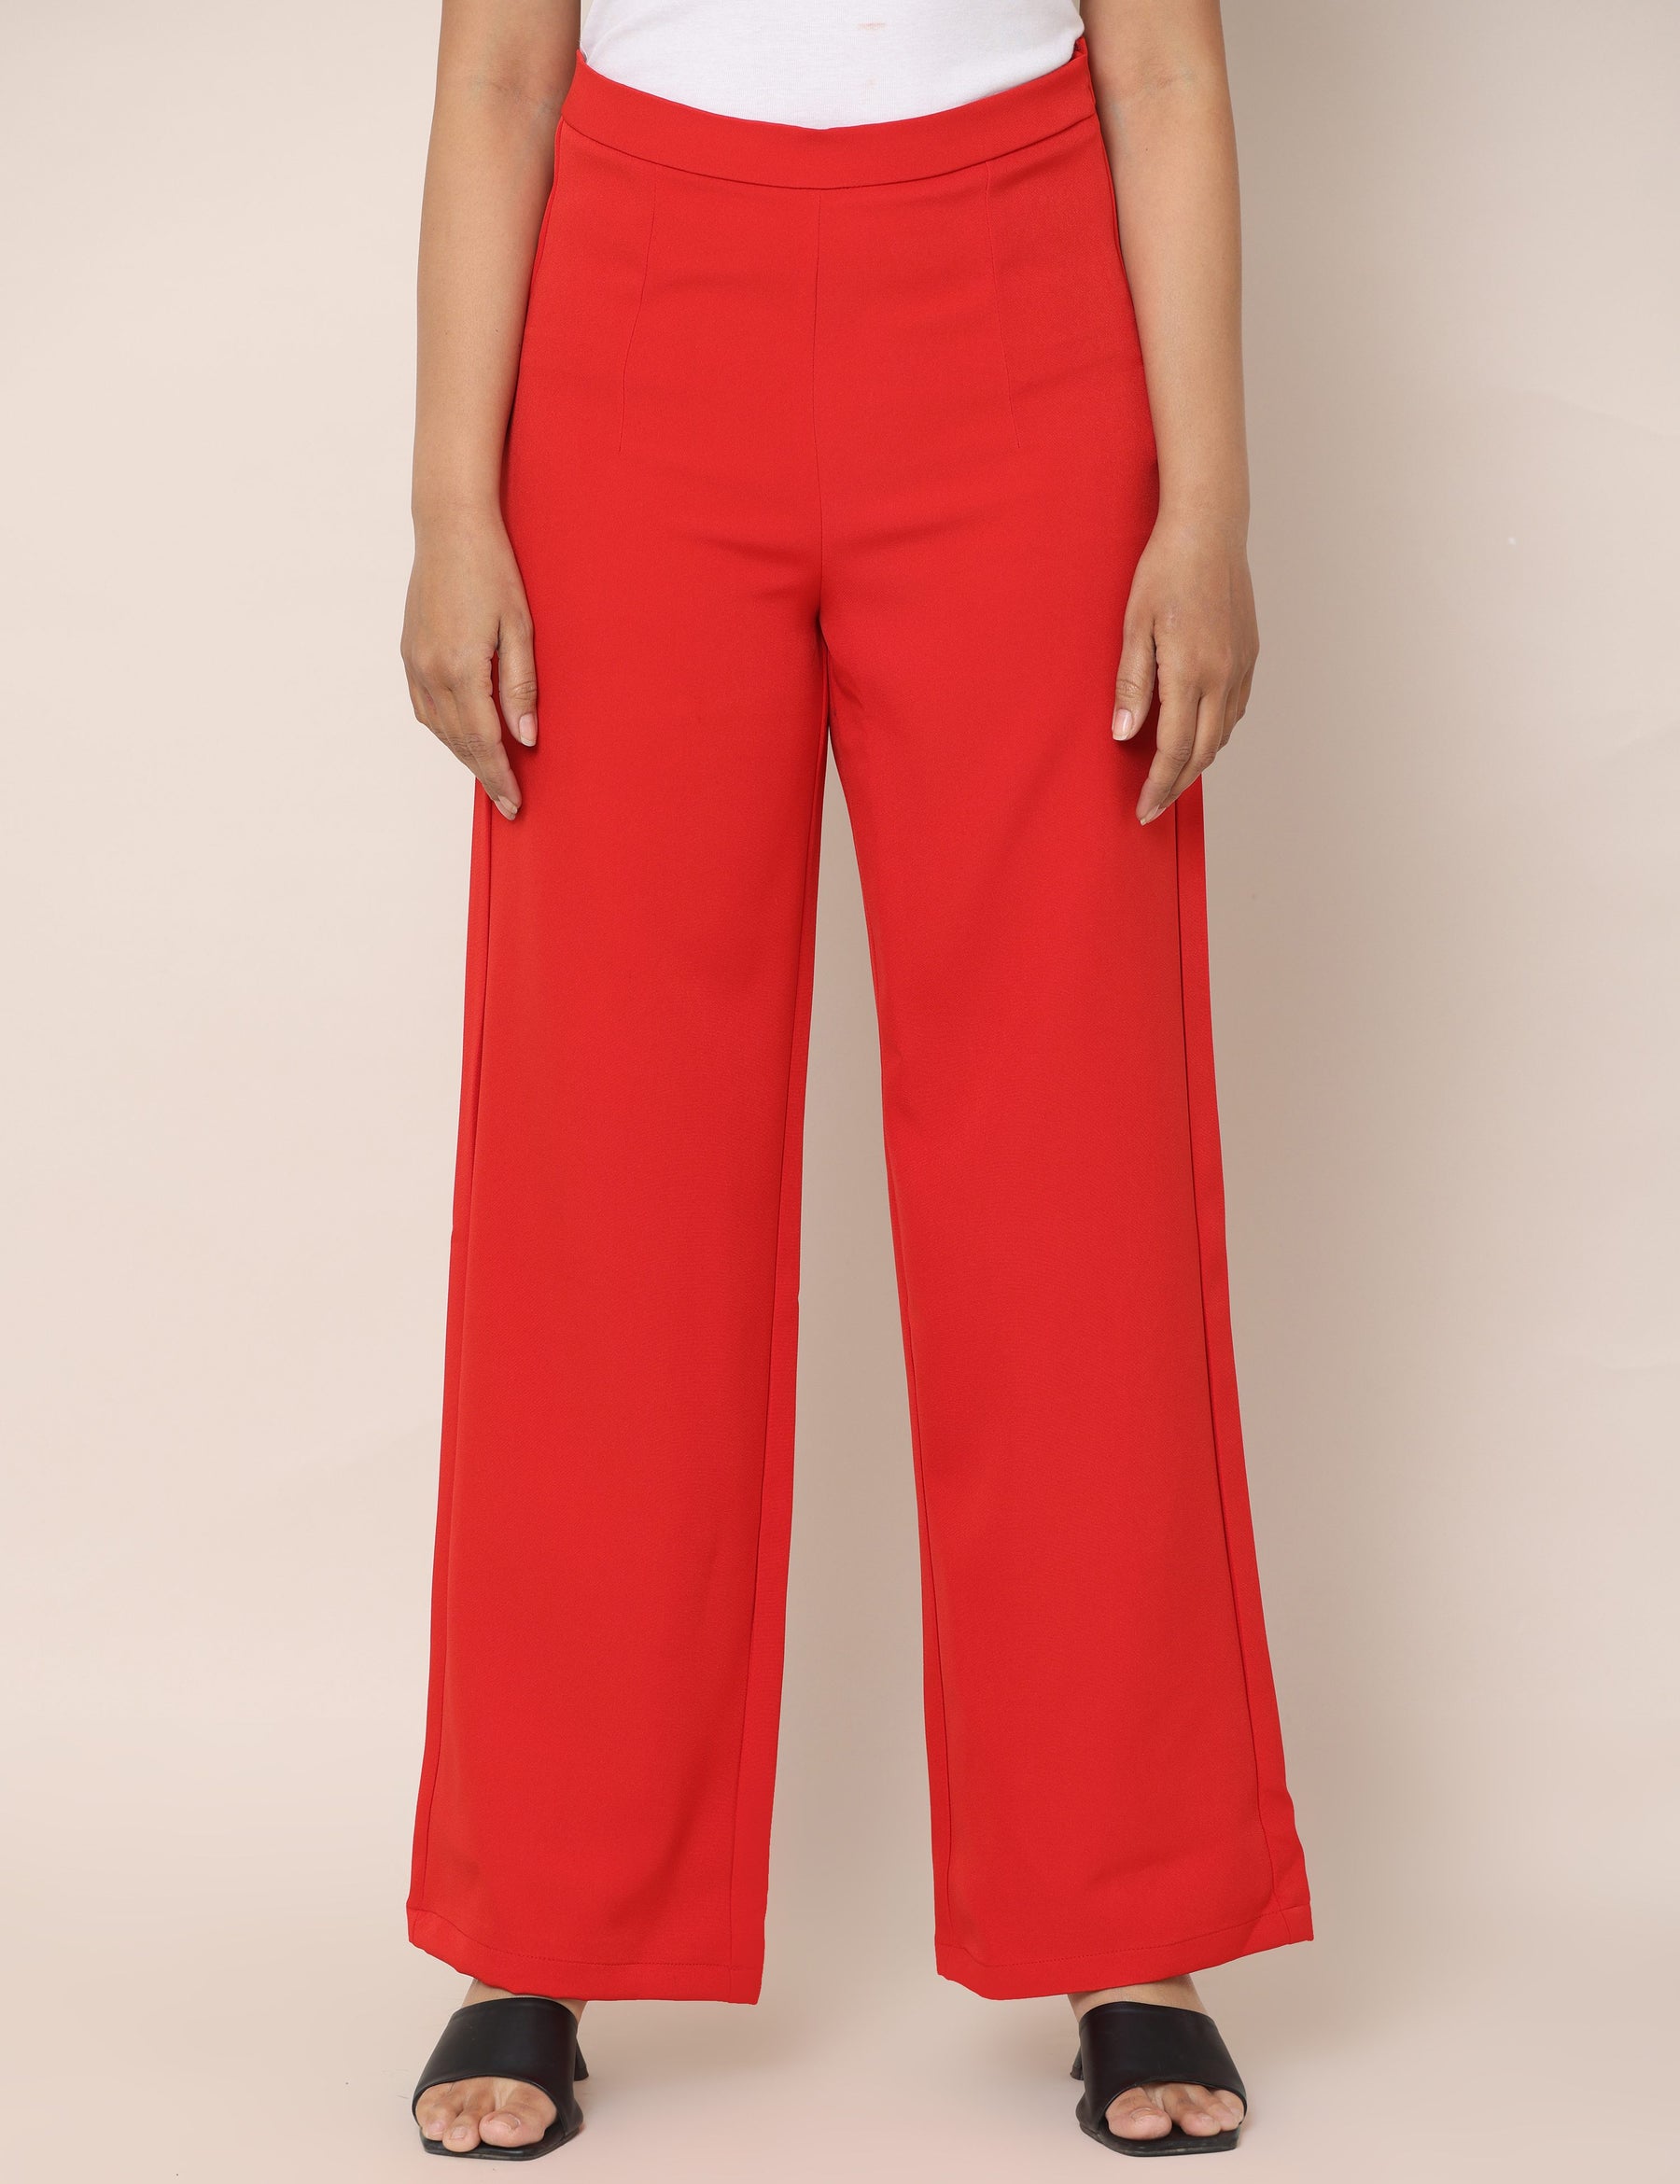 4 Way Stretch High-waist trousers-Red